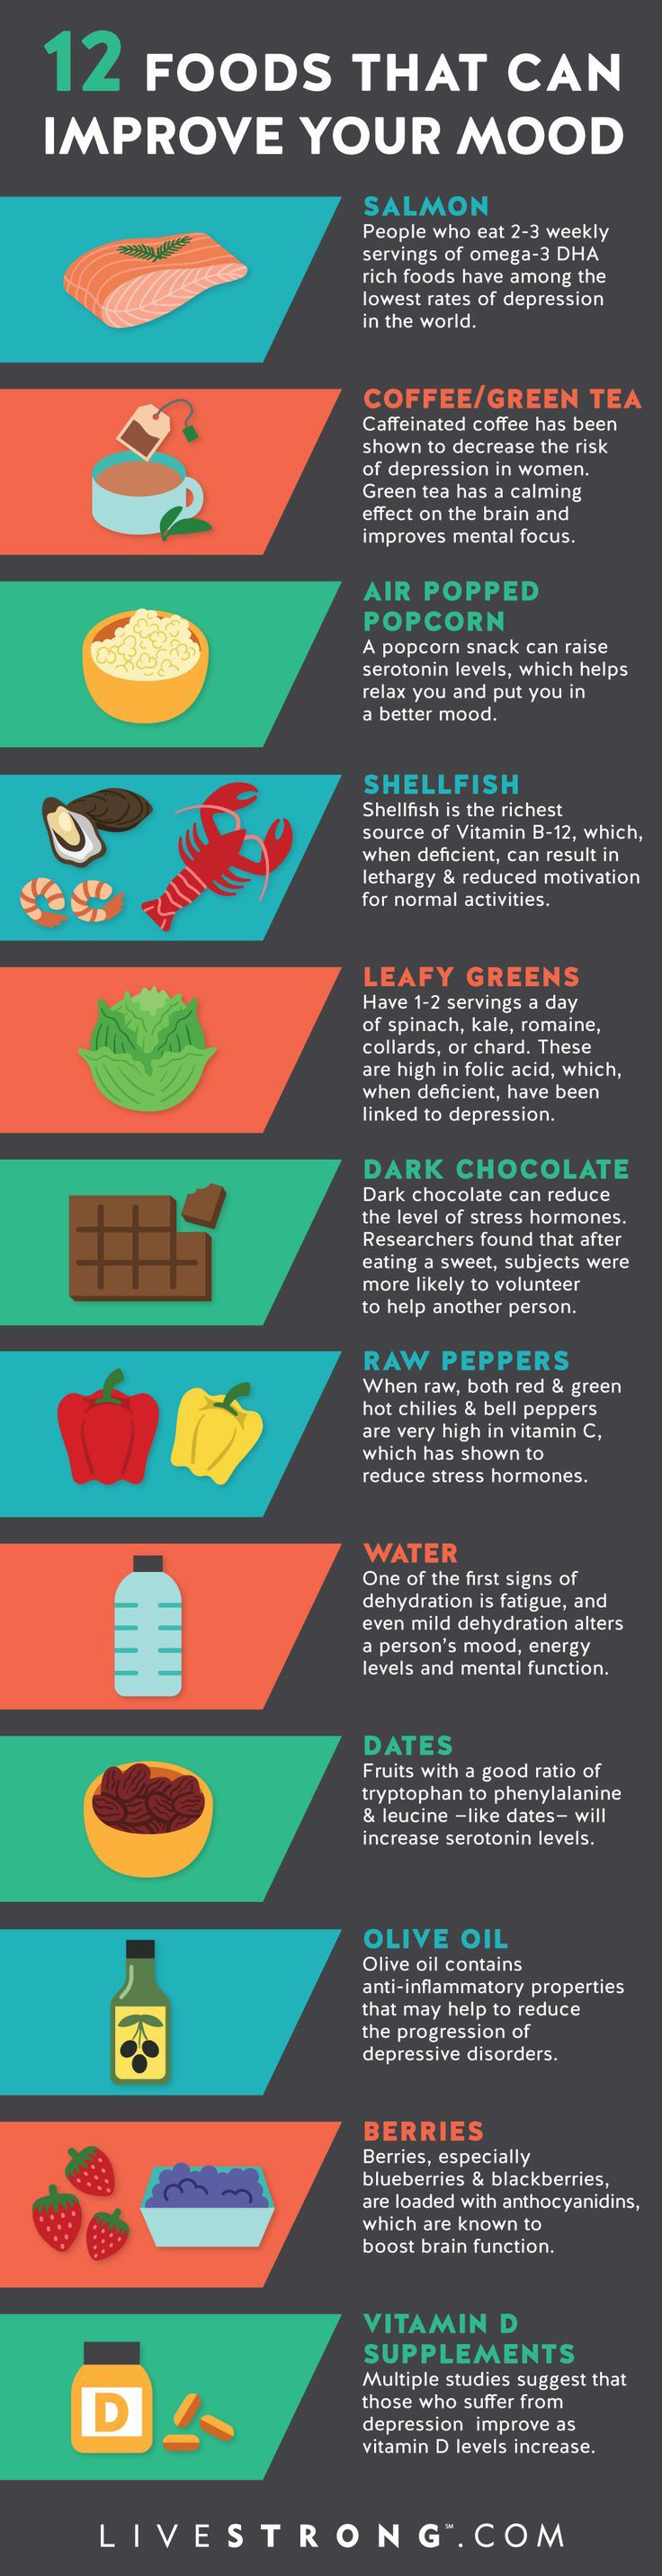 Top 12 Healthy Foods That Can Improve Your Mood Infographic